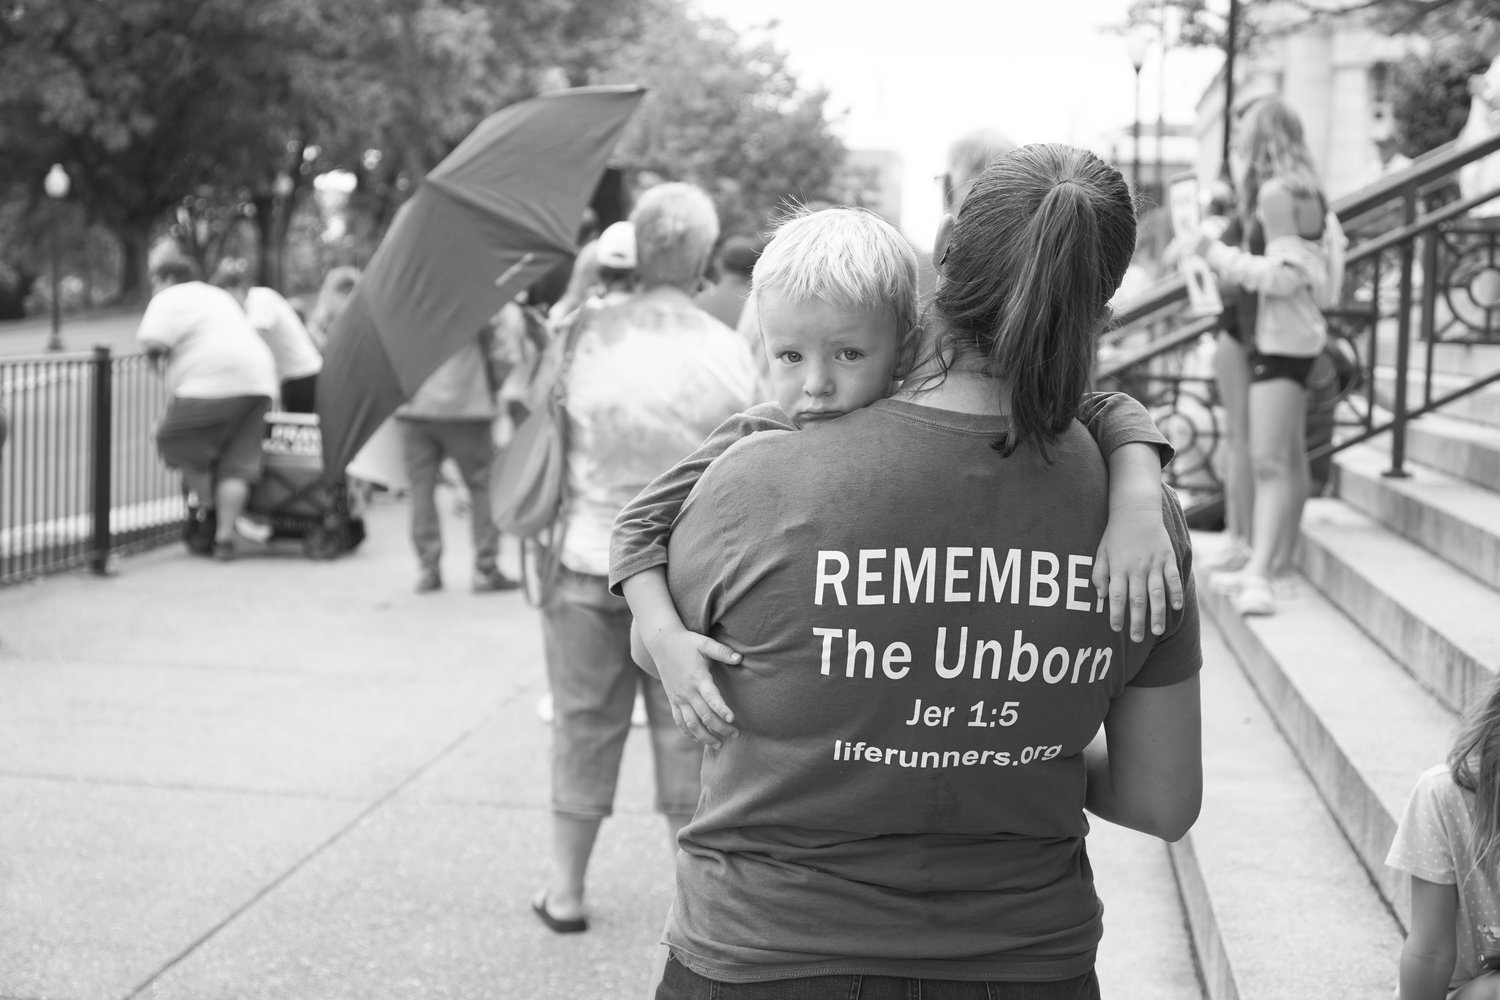 A mother and child take part in the Decision Day Rally outside the Missouri Supreme Court Building on June 24.